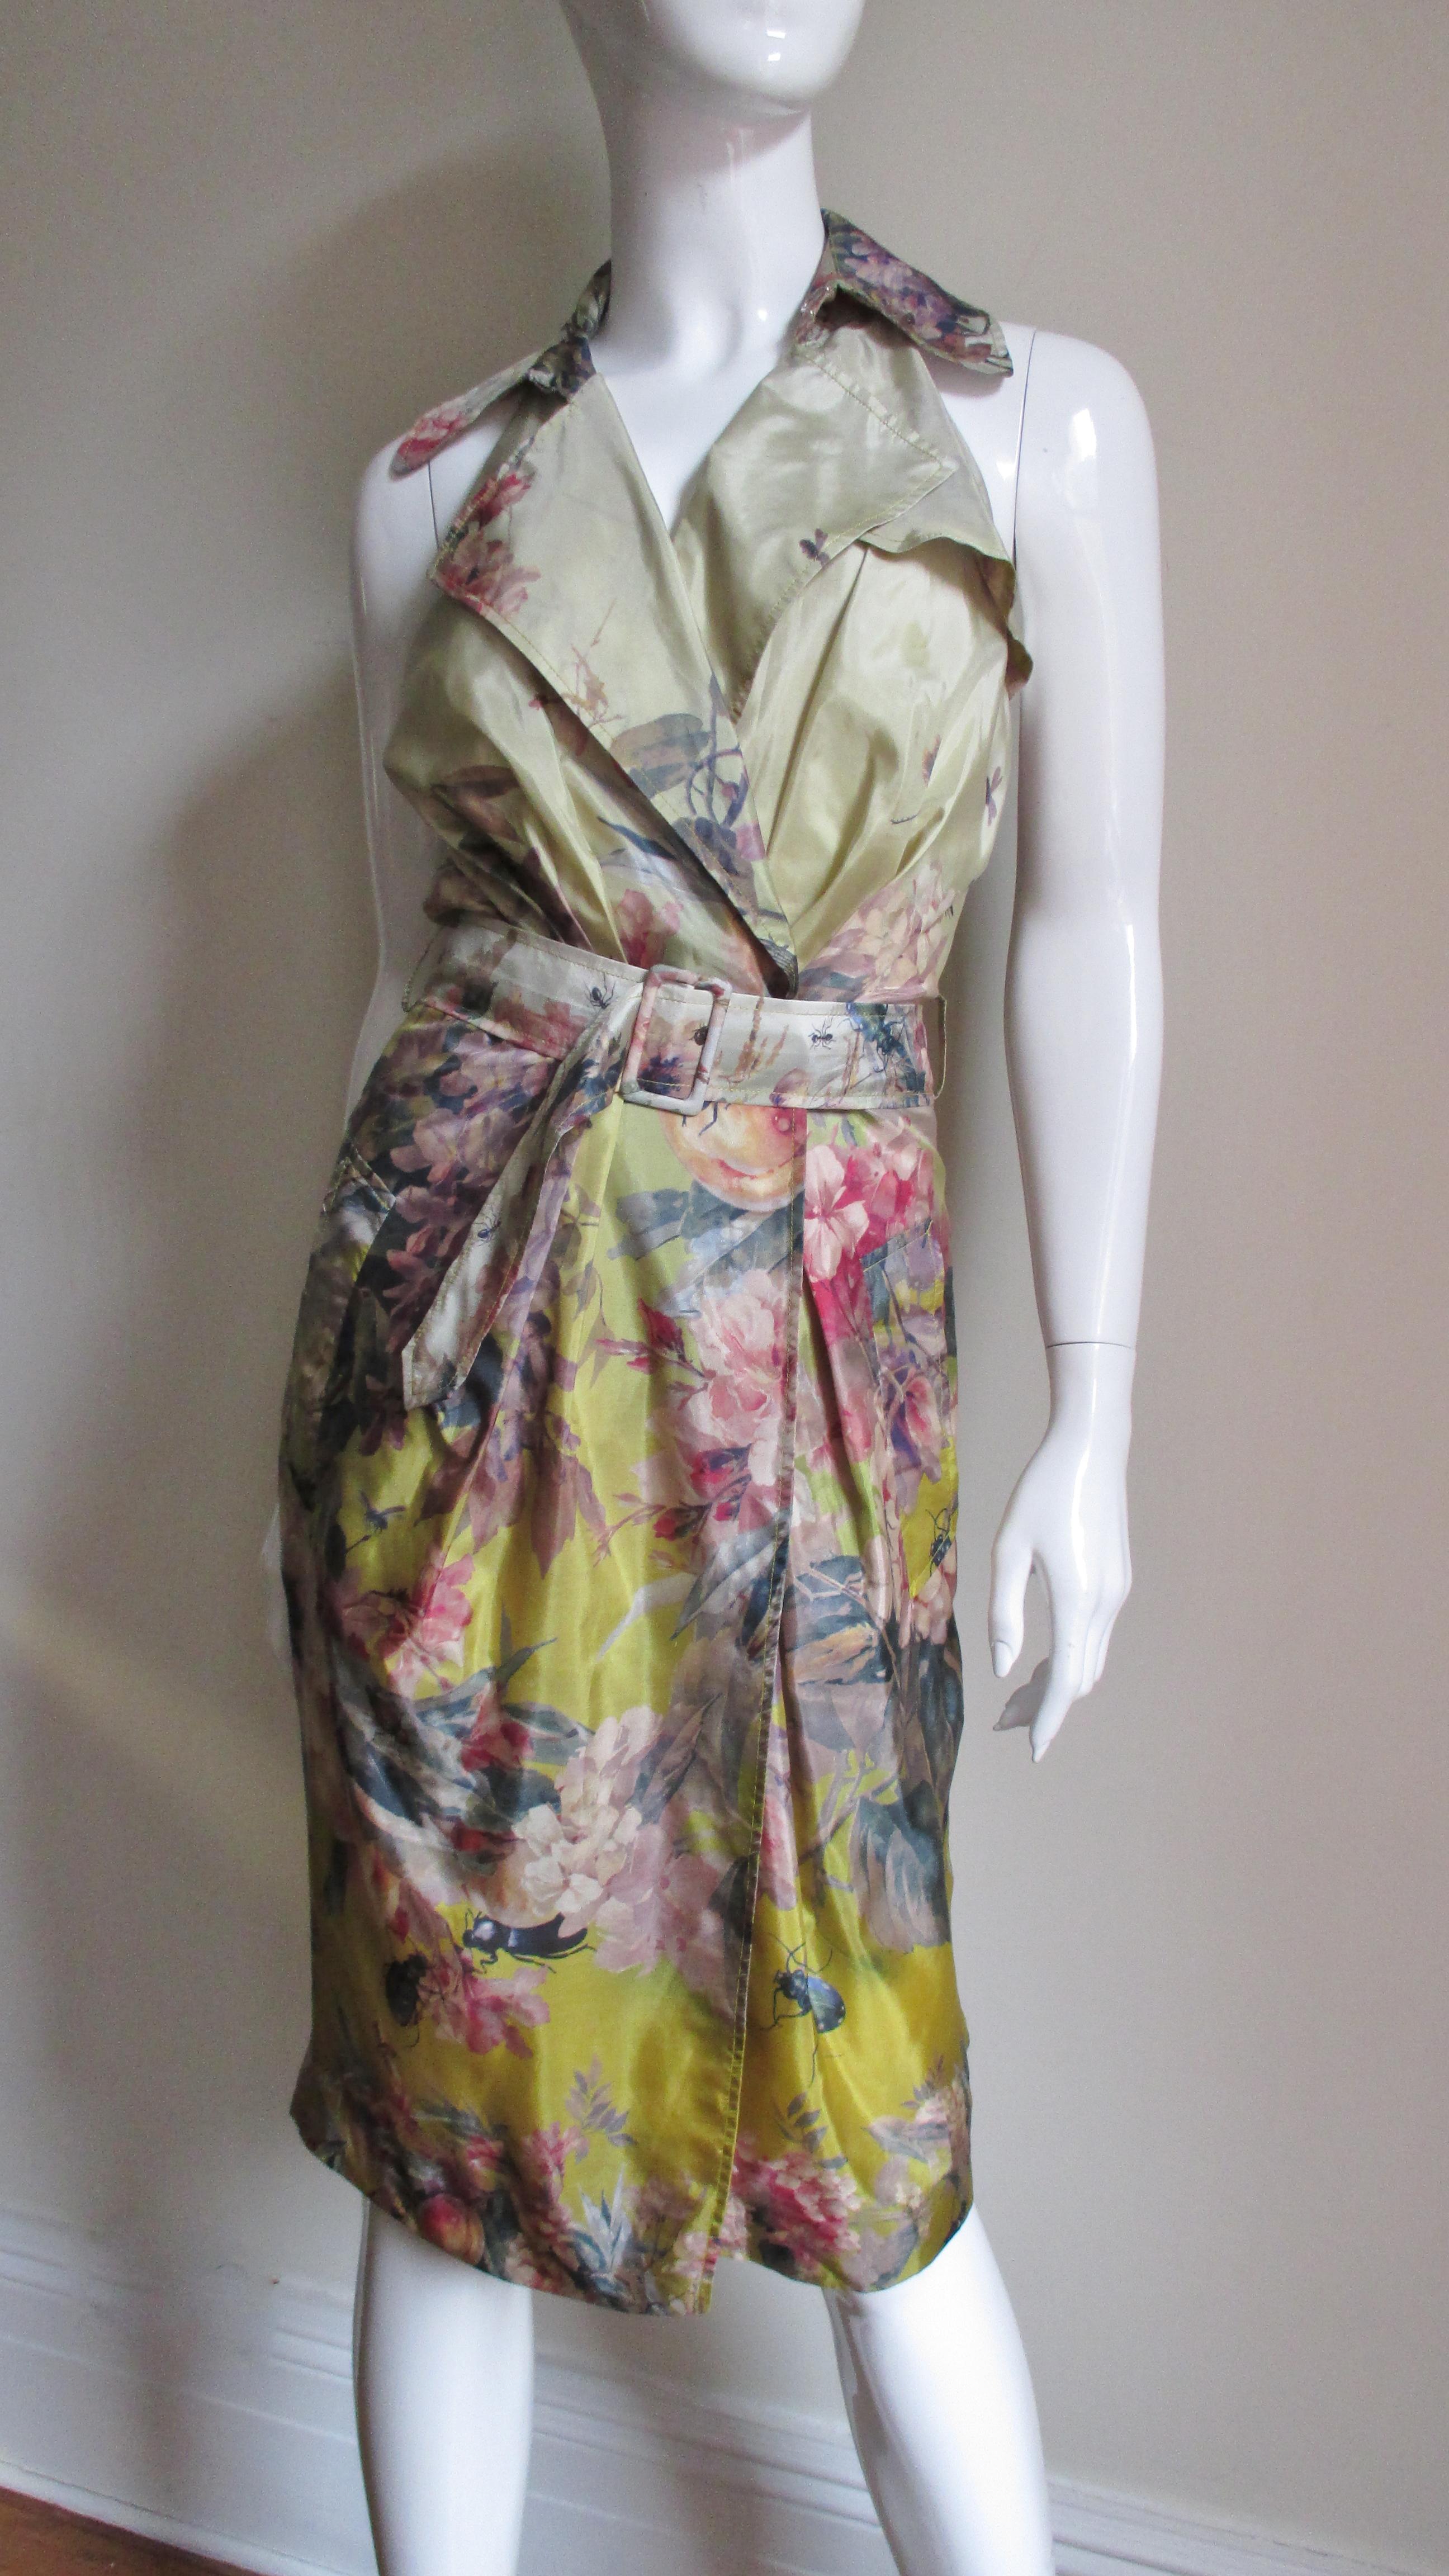 A great dragonfly and flower pattern silk dress from Jean Paul Gaultier in shades of yellow, green, gold, coral and pink on an ombre yellow background.  It is a wrap style with cut in shoulders, a lapel collar which can be worn open or closed, front